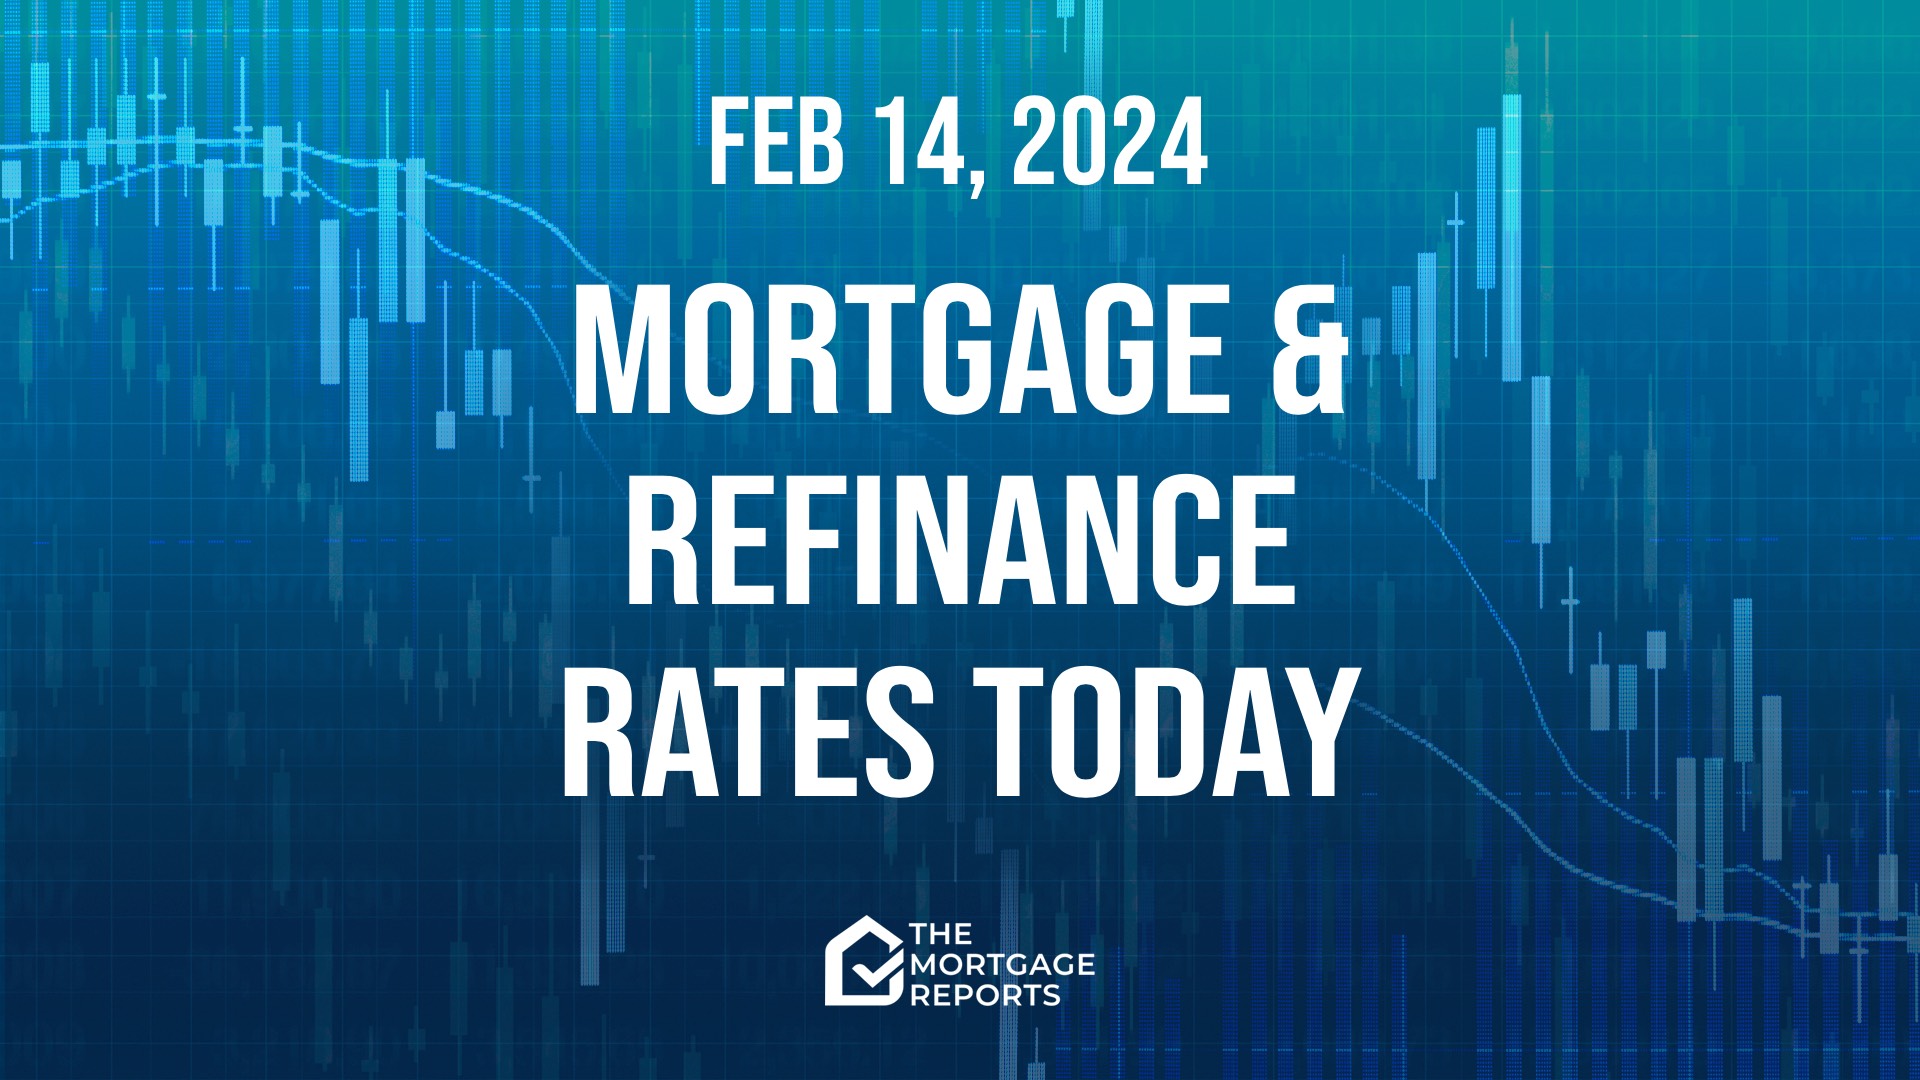 Mortgage rates today, Feb 14, 2024